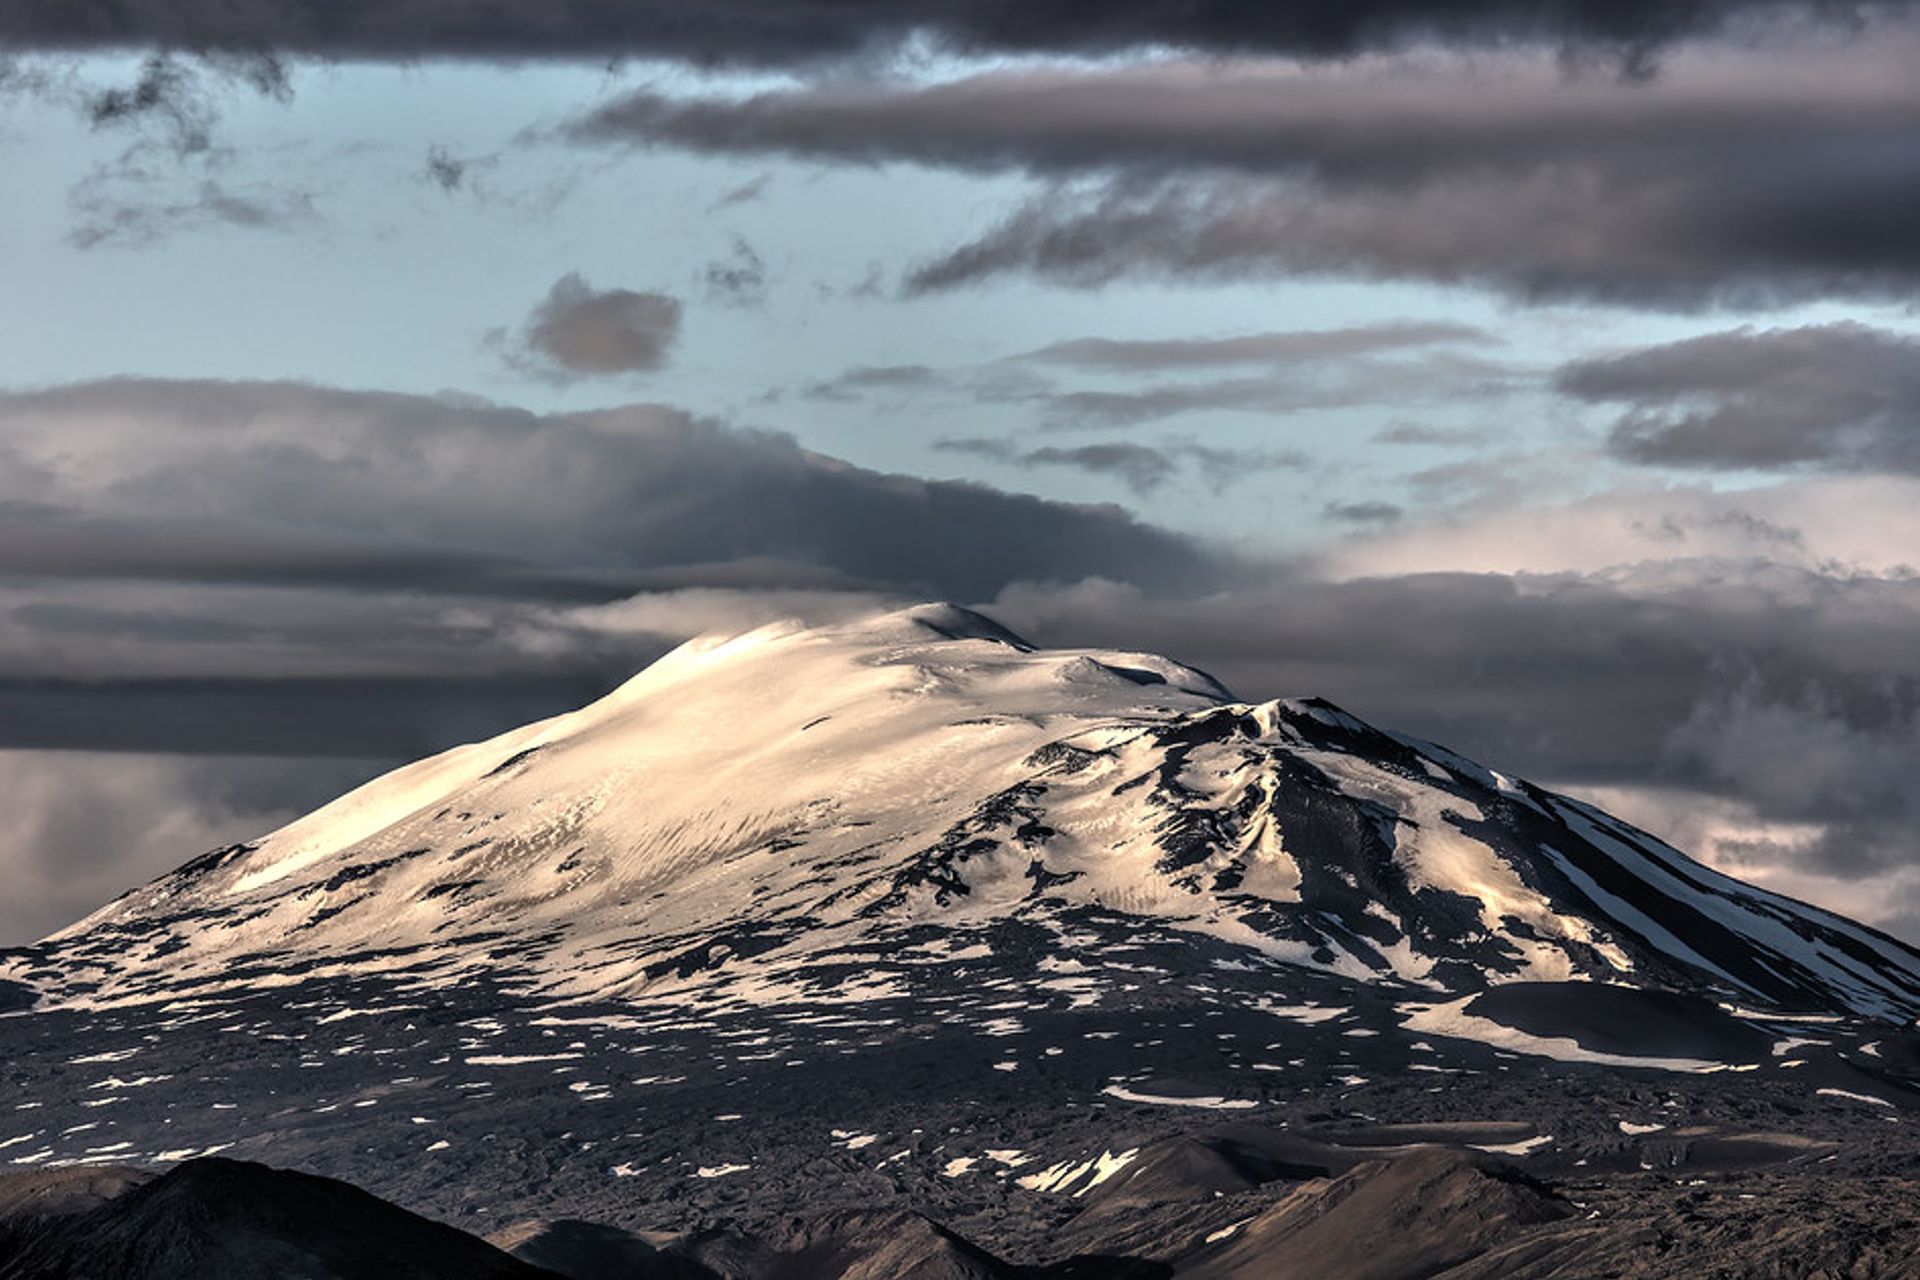 The imposing, menacing Hekla stratovolcano, one of Iceland's most active volcanoes, seen from the road from Landmannalaugar